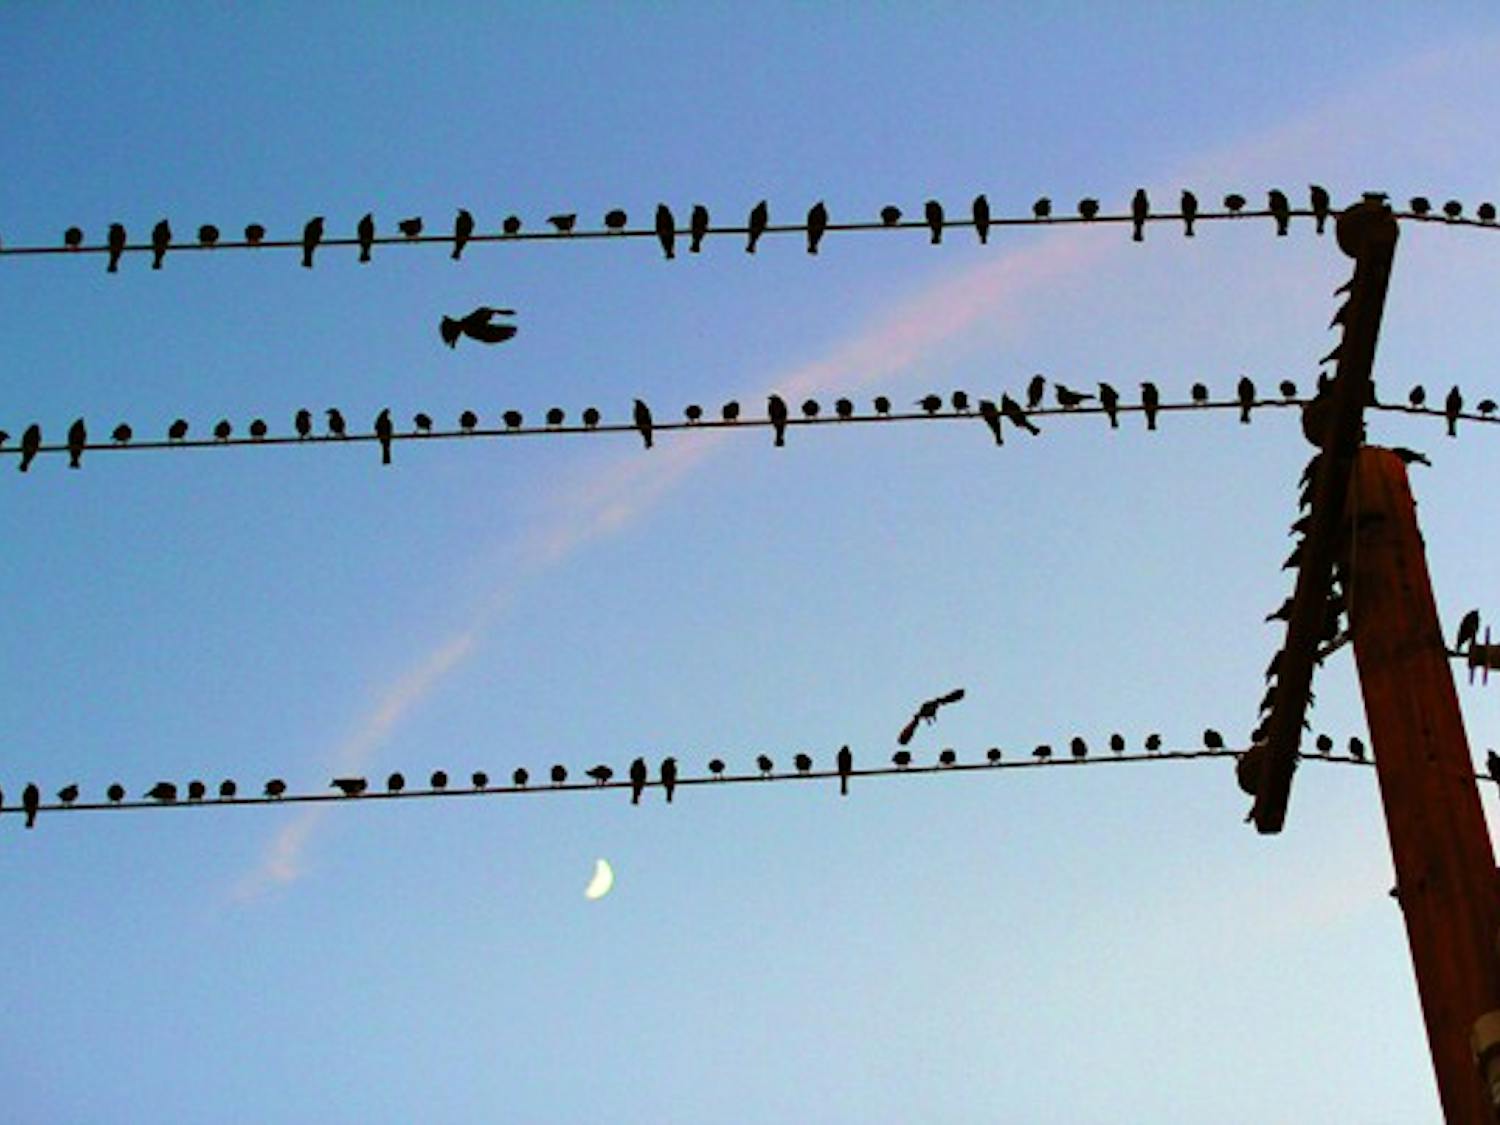 Dozens of birds flock to a power line under a partial moon near the Tempe campus Wednesday evening. (Photo by Lisa Bartoli)